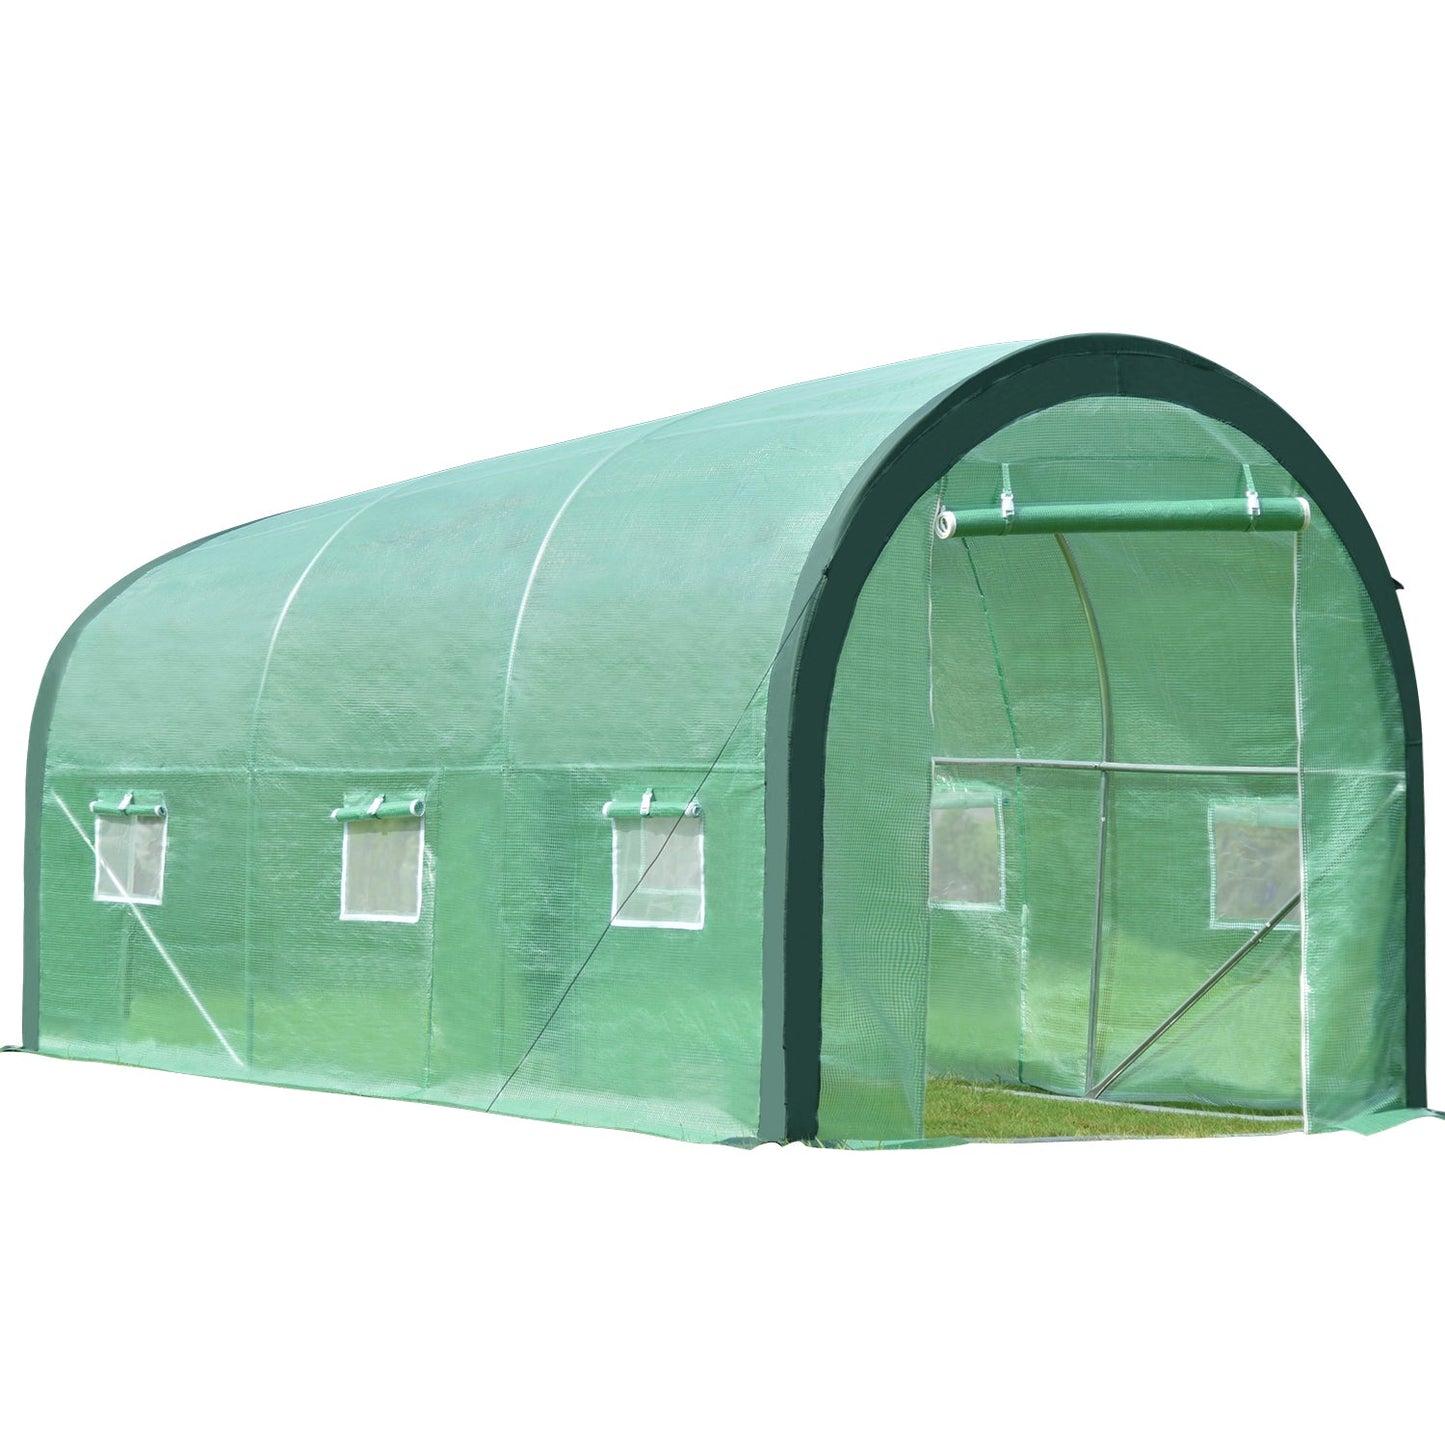 12 ft. x 7 ft. x 7 ft. Walk-in Tunnel Greenhouse with Zipper Door, Side Windows Greenhouse Aoodor Green  